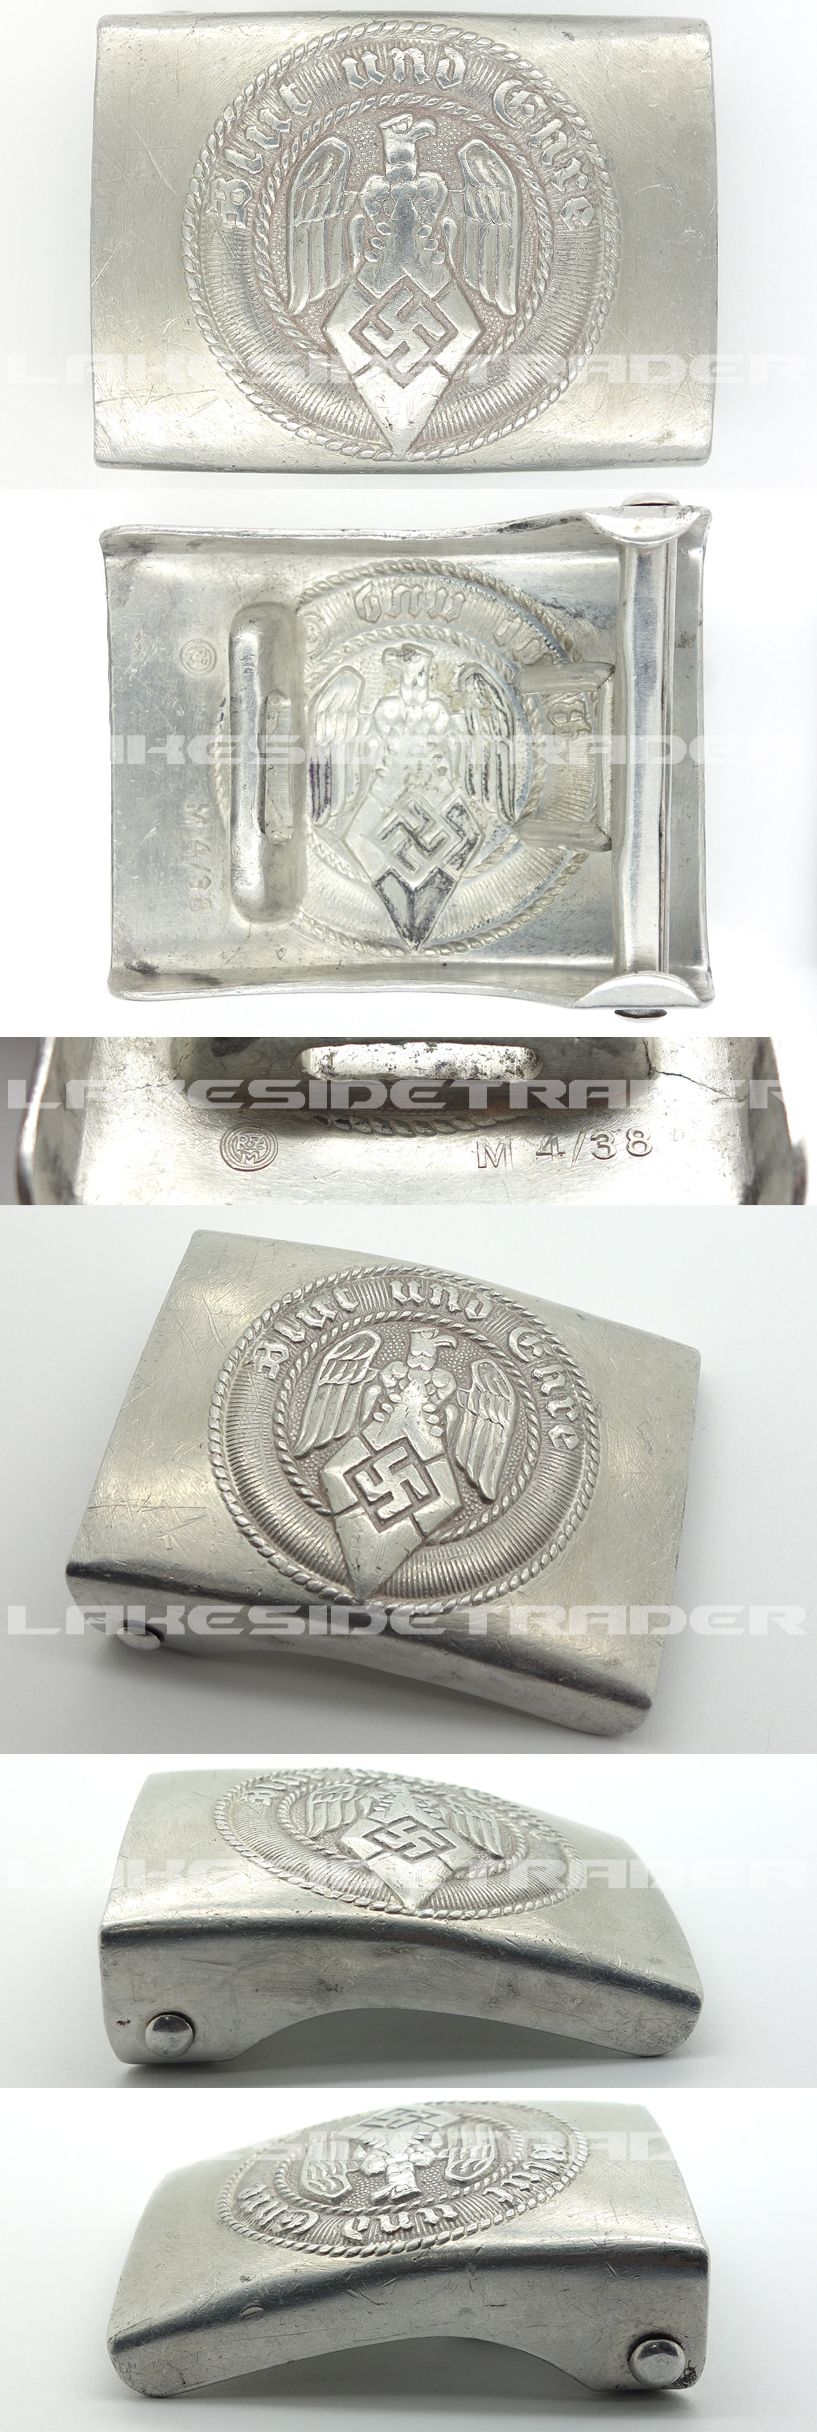 Hitler Youth Belt Buckle by RS&S